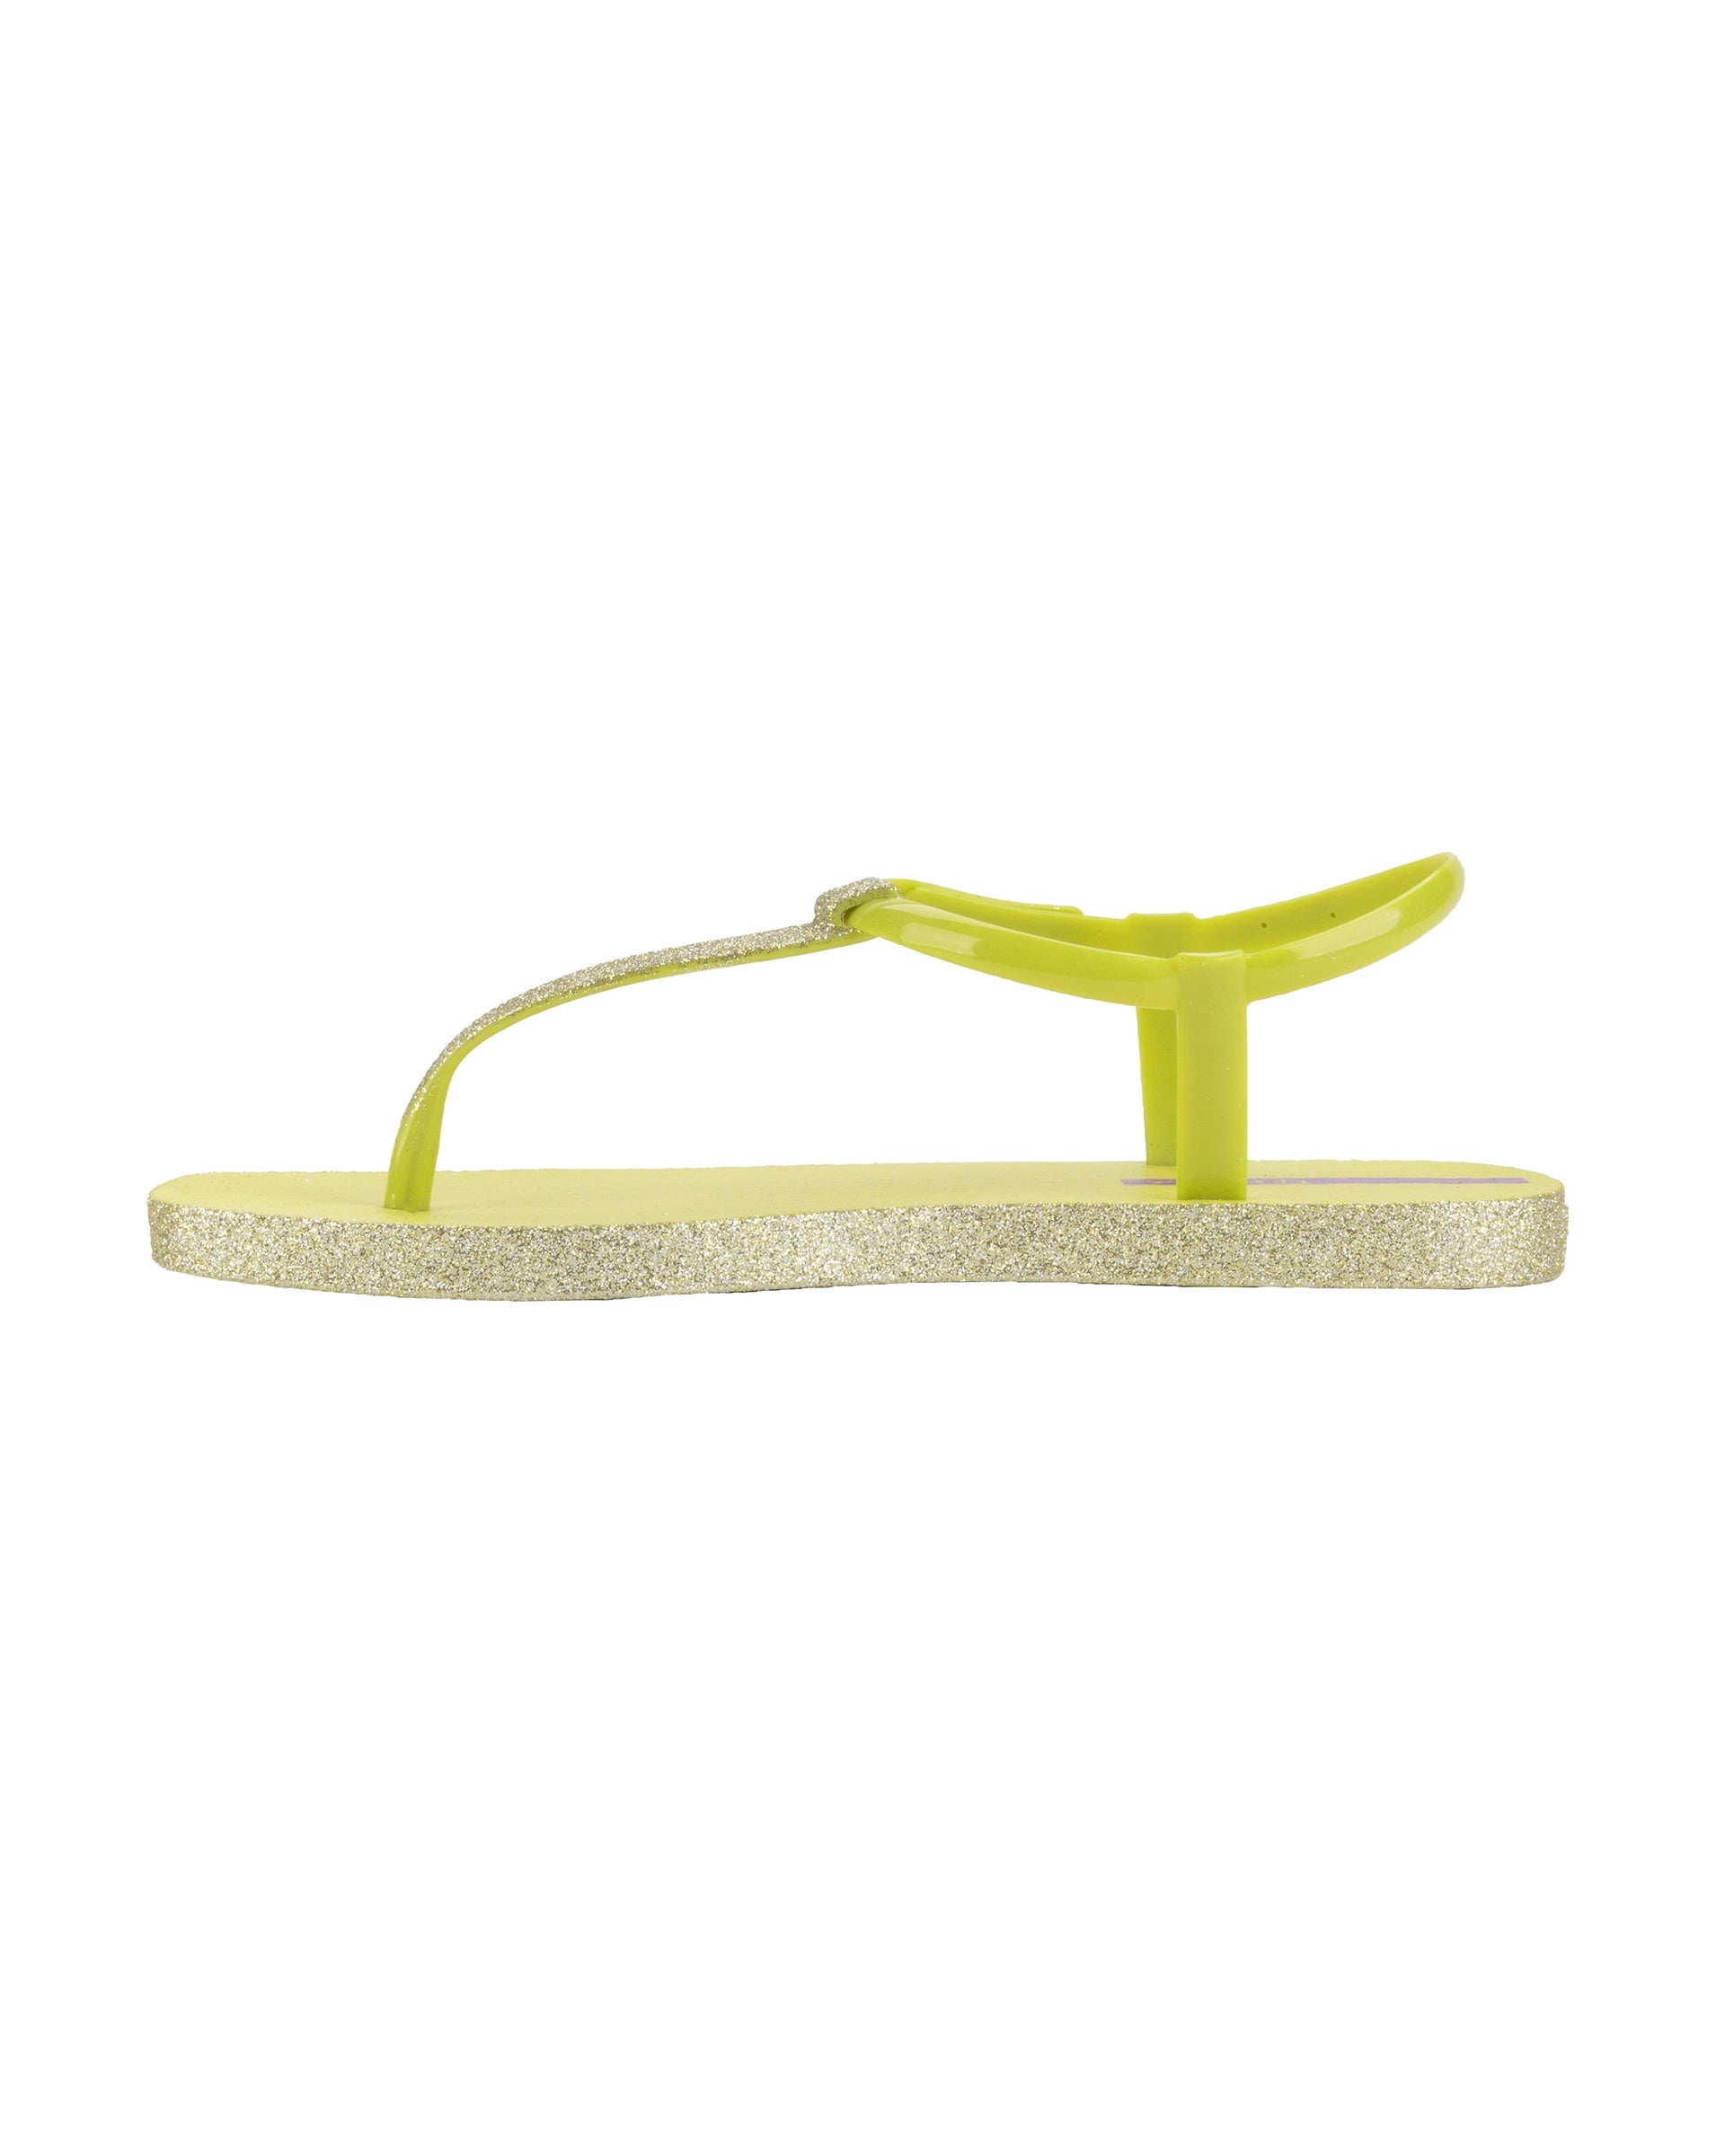 Inner side view of a green Ipanema Class Edge Glow t-strap women's sandal with glitter green thong.